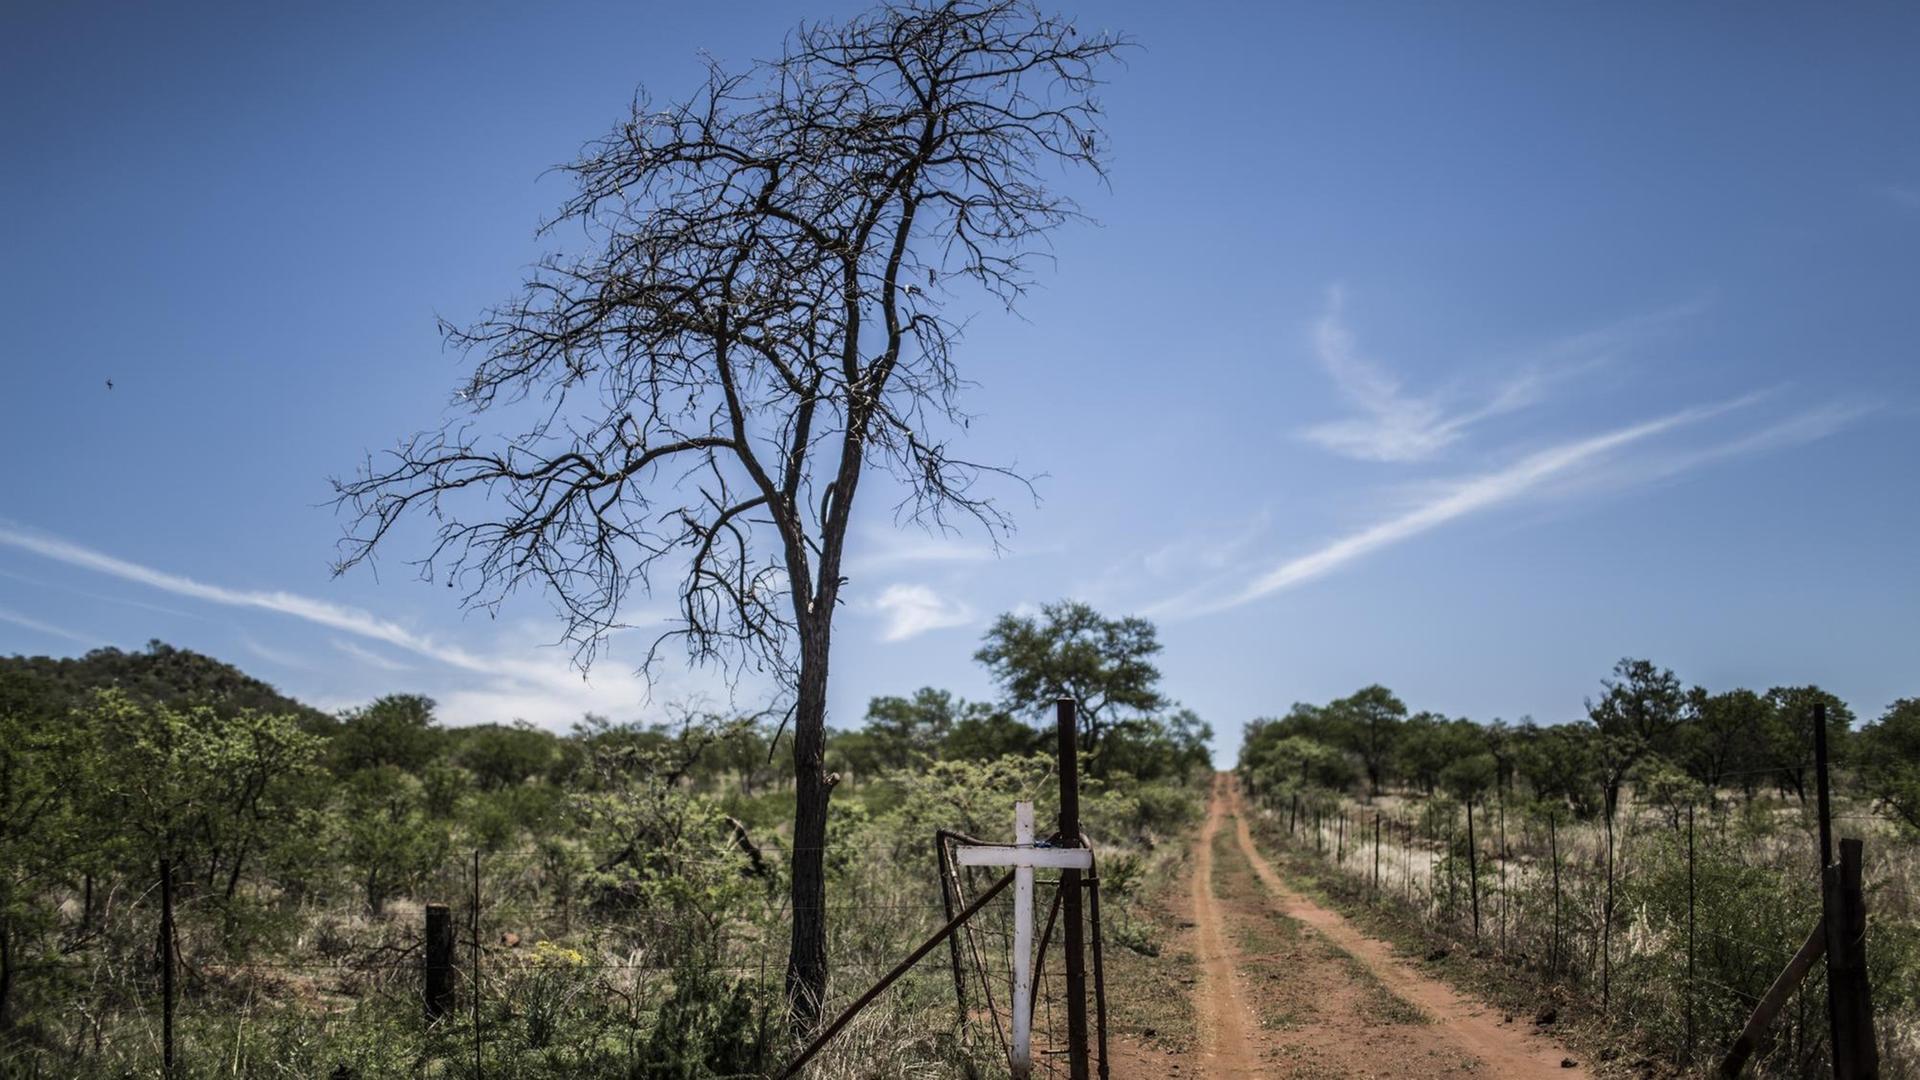 A cross mounted on a fence marks the road to the White Cross Monument, where other crosses are planted to commemorate white farmers who have been killed in a farm murder, on October 31, 2017, in Ysterberg, near Langebaan, South Africa. A long campaign of violence against the country's farmers, who are largely white, has inflamed political and racial tensions nearly a quarter-of-a-century after the fall of apartheid. / AFP PHOTO / GULSHAN KHAN